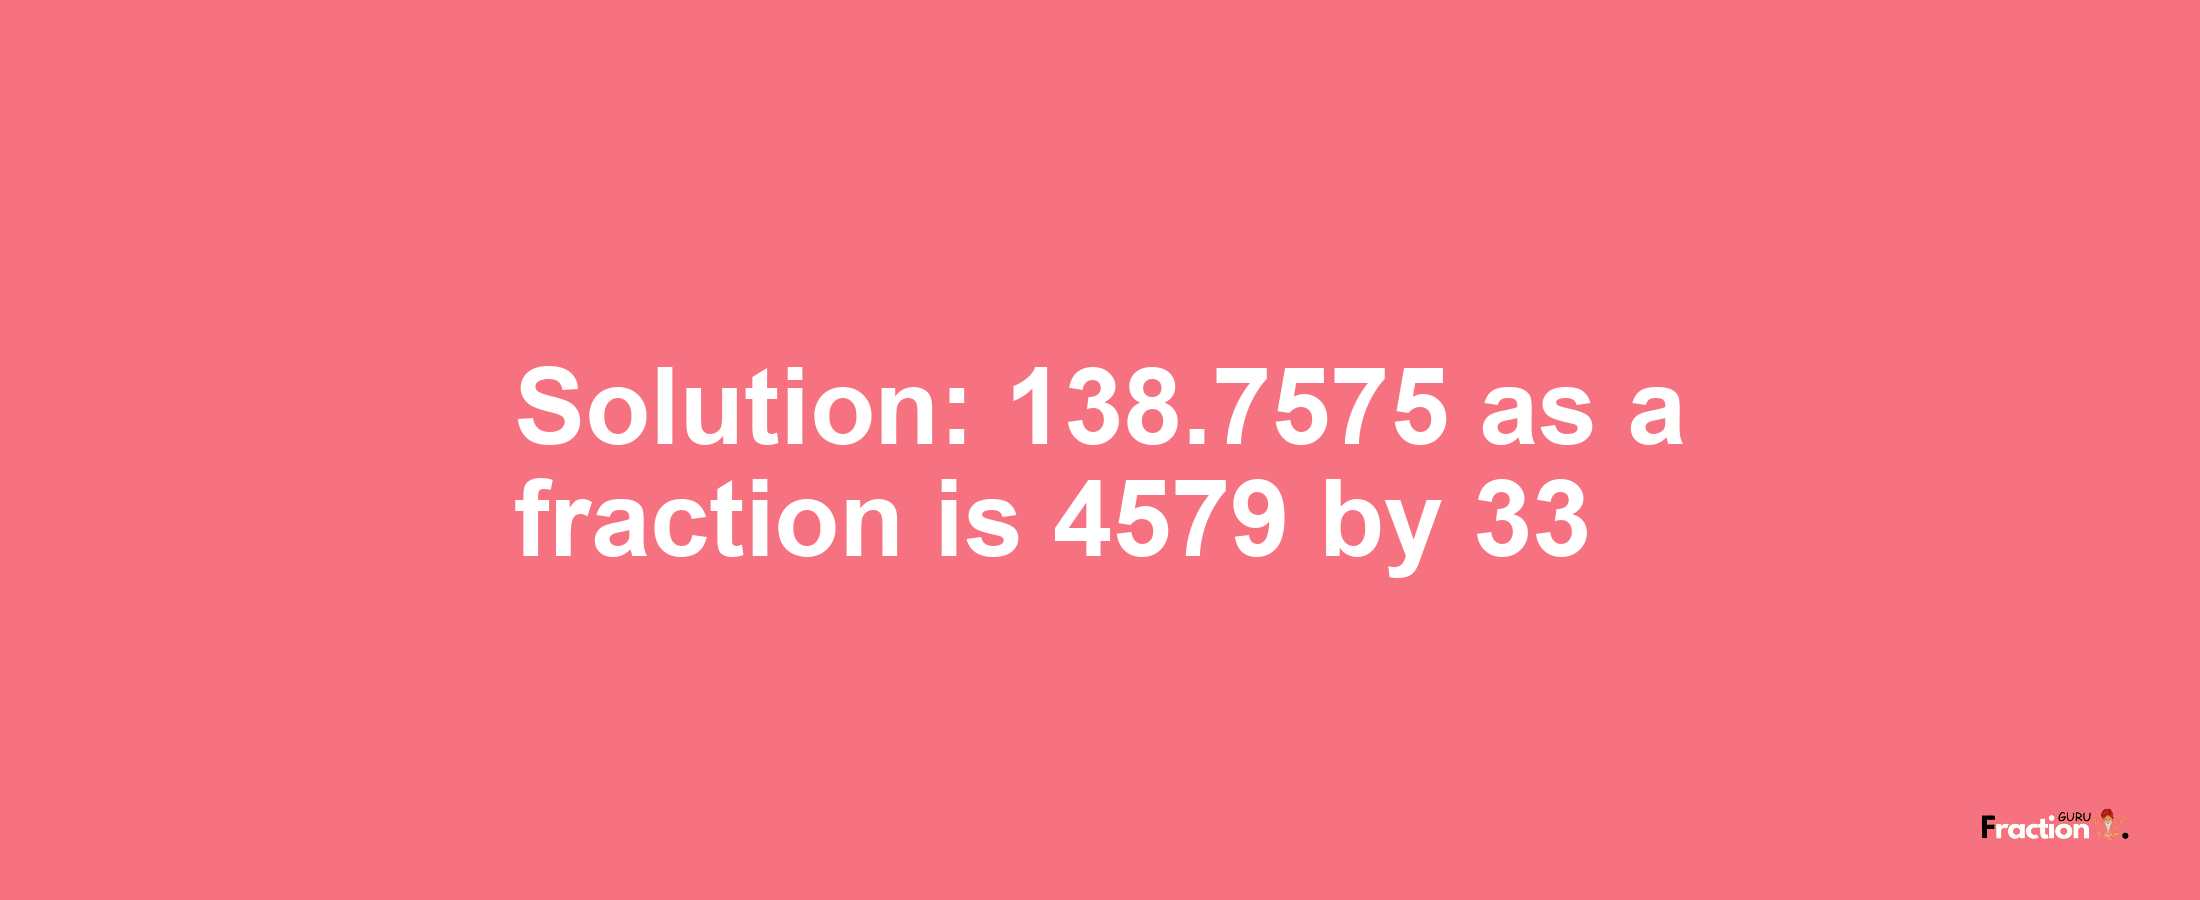 Solution:138.7575 as a fraction is 4579/33